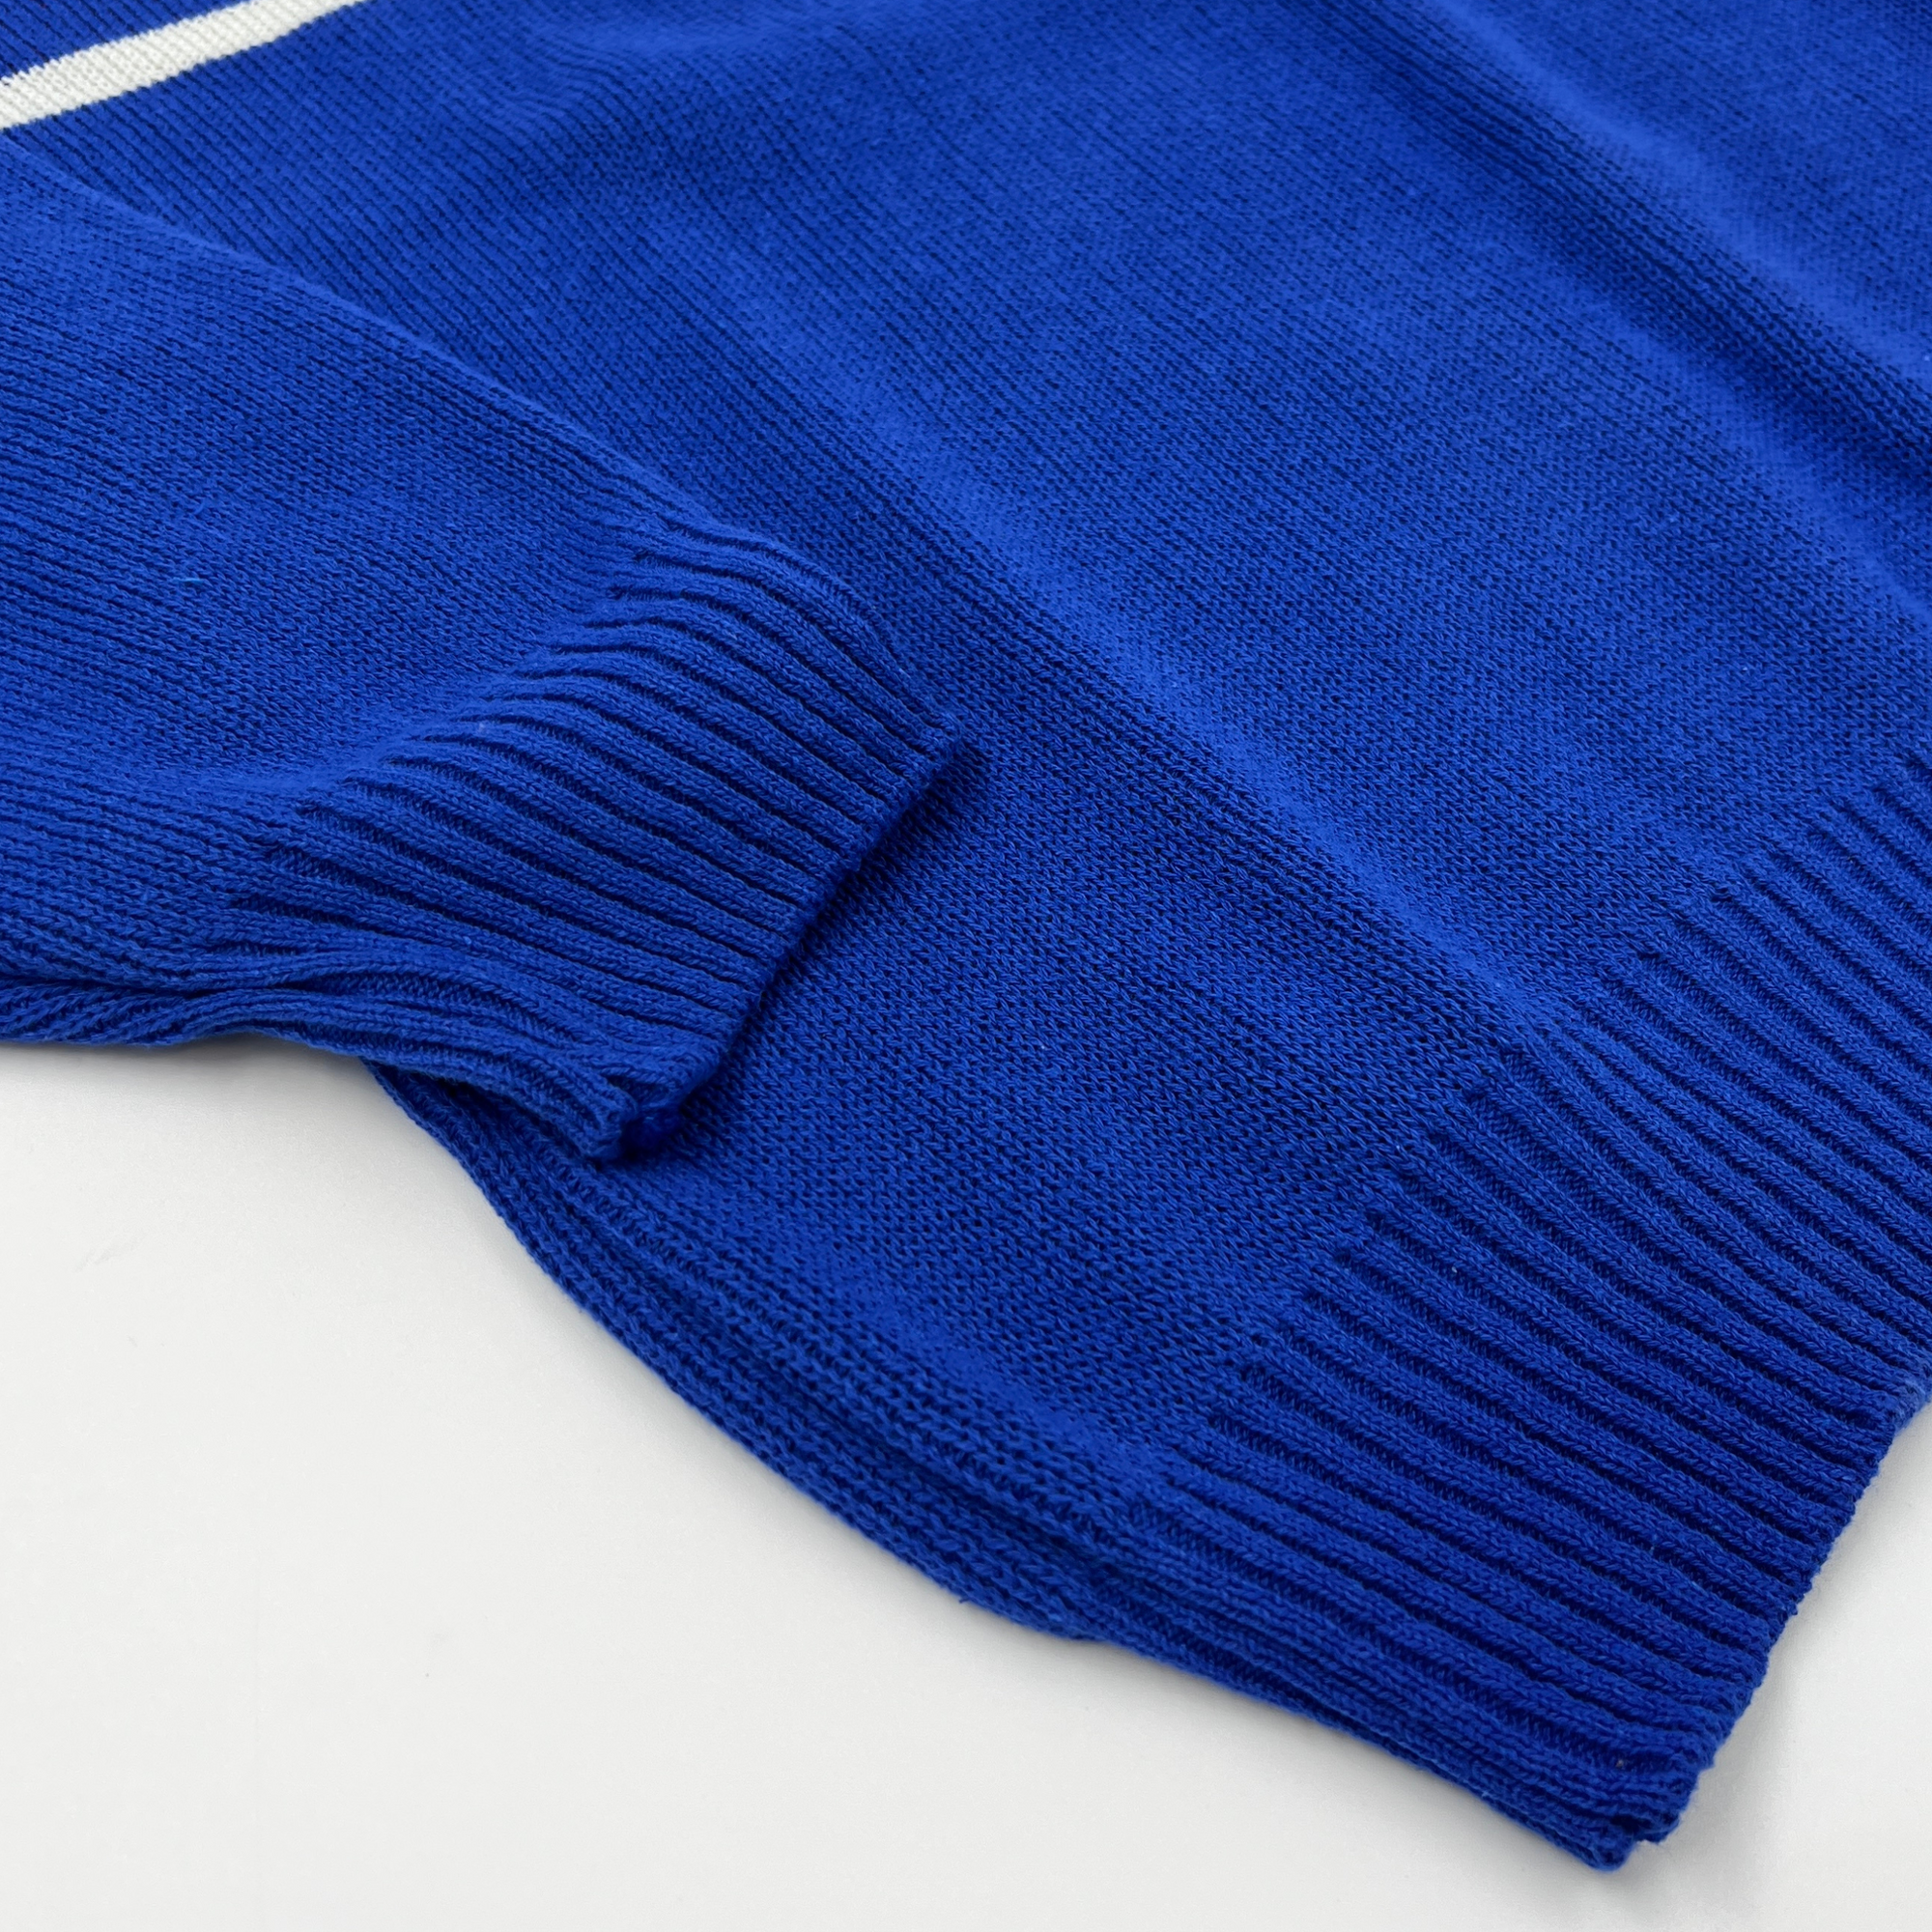 BFLO Royal Blue Rollneck High Quality Pullover Sweater